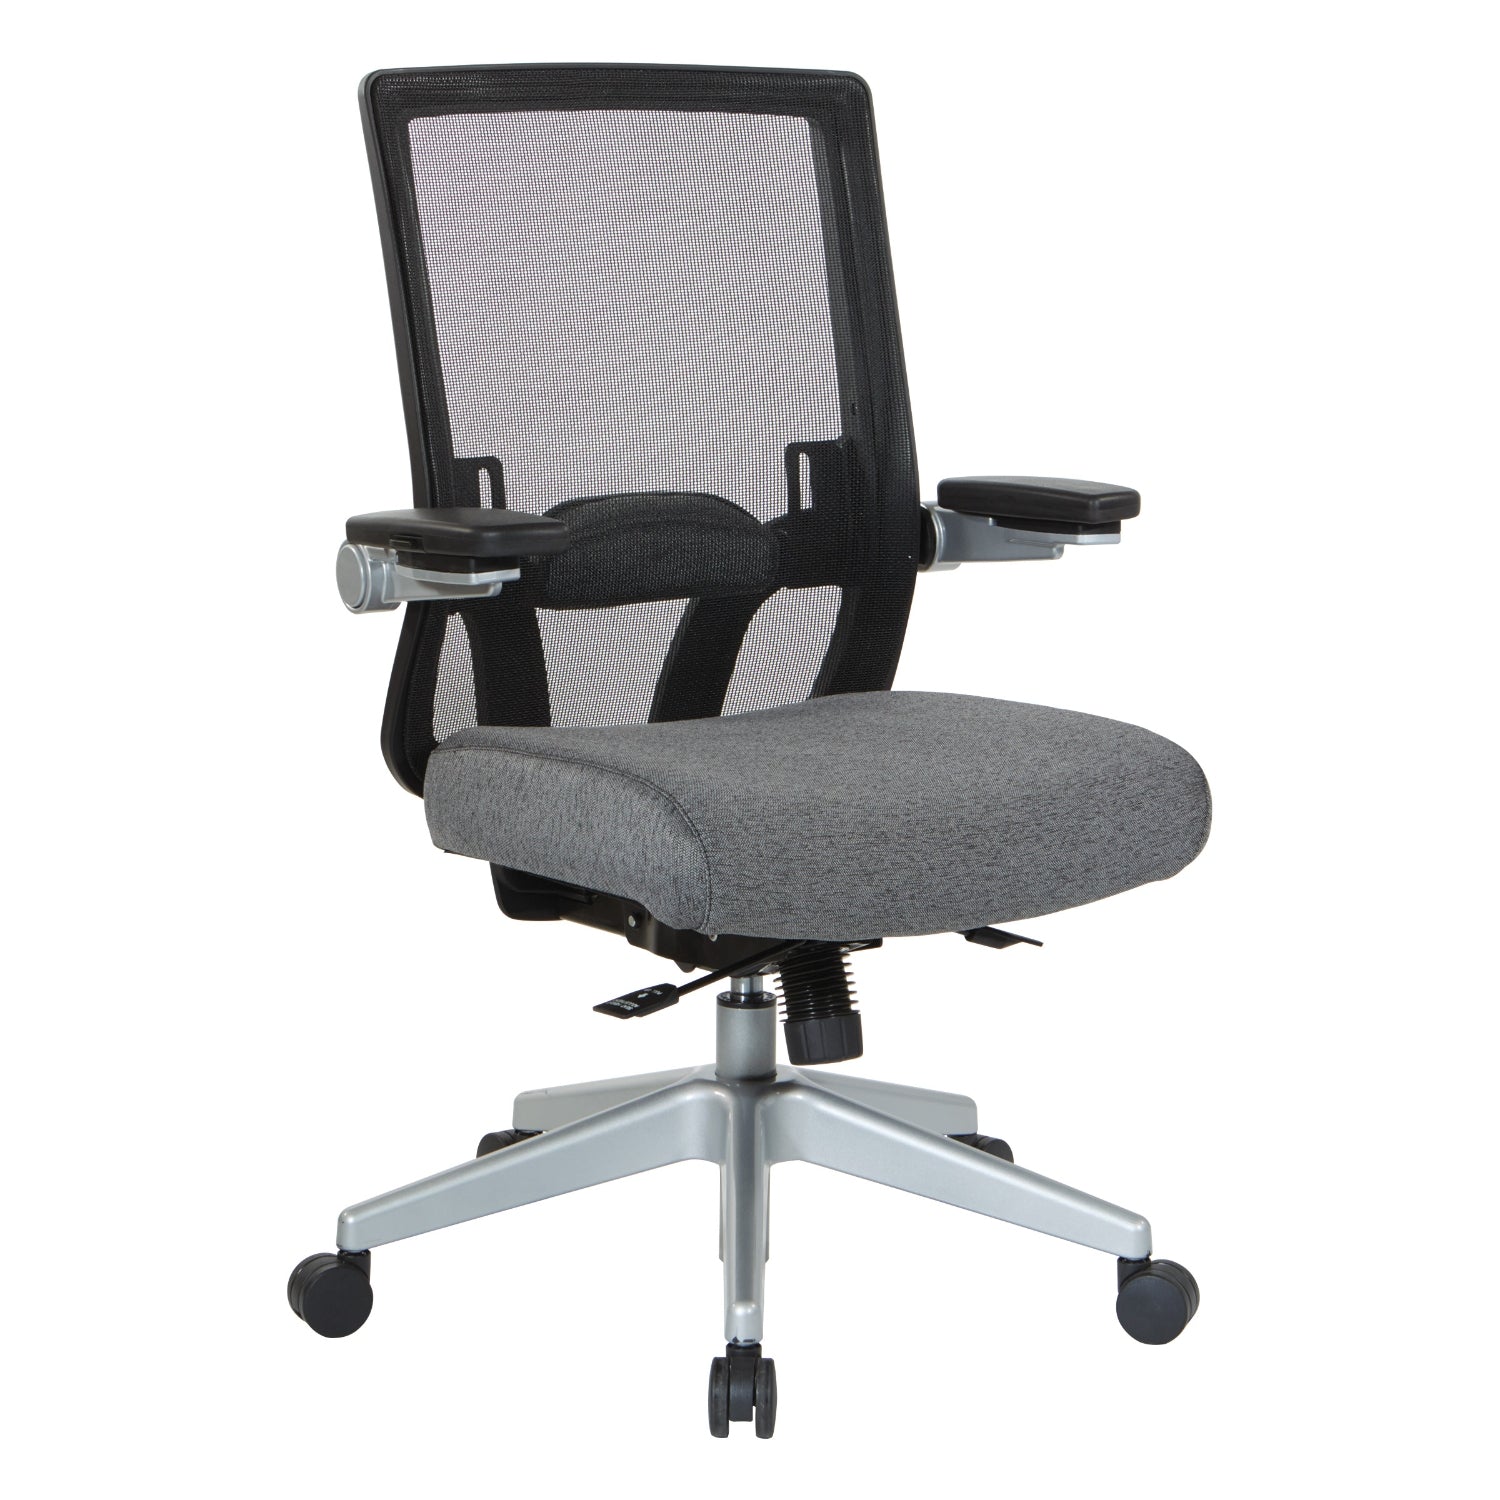 Breathable Mesh Back Manager's Chair with 4" Thick Padded Seat, Height Adjustable Lumbar Support, 3-Way Padded Cantilever Adjustable Flip Arms, Seat Slider and Silver Nylon Base